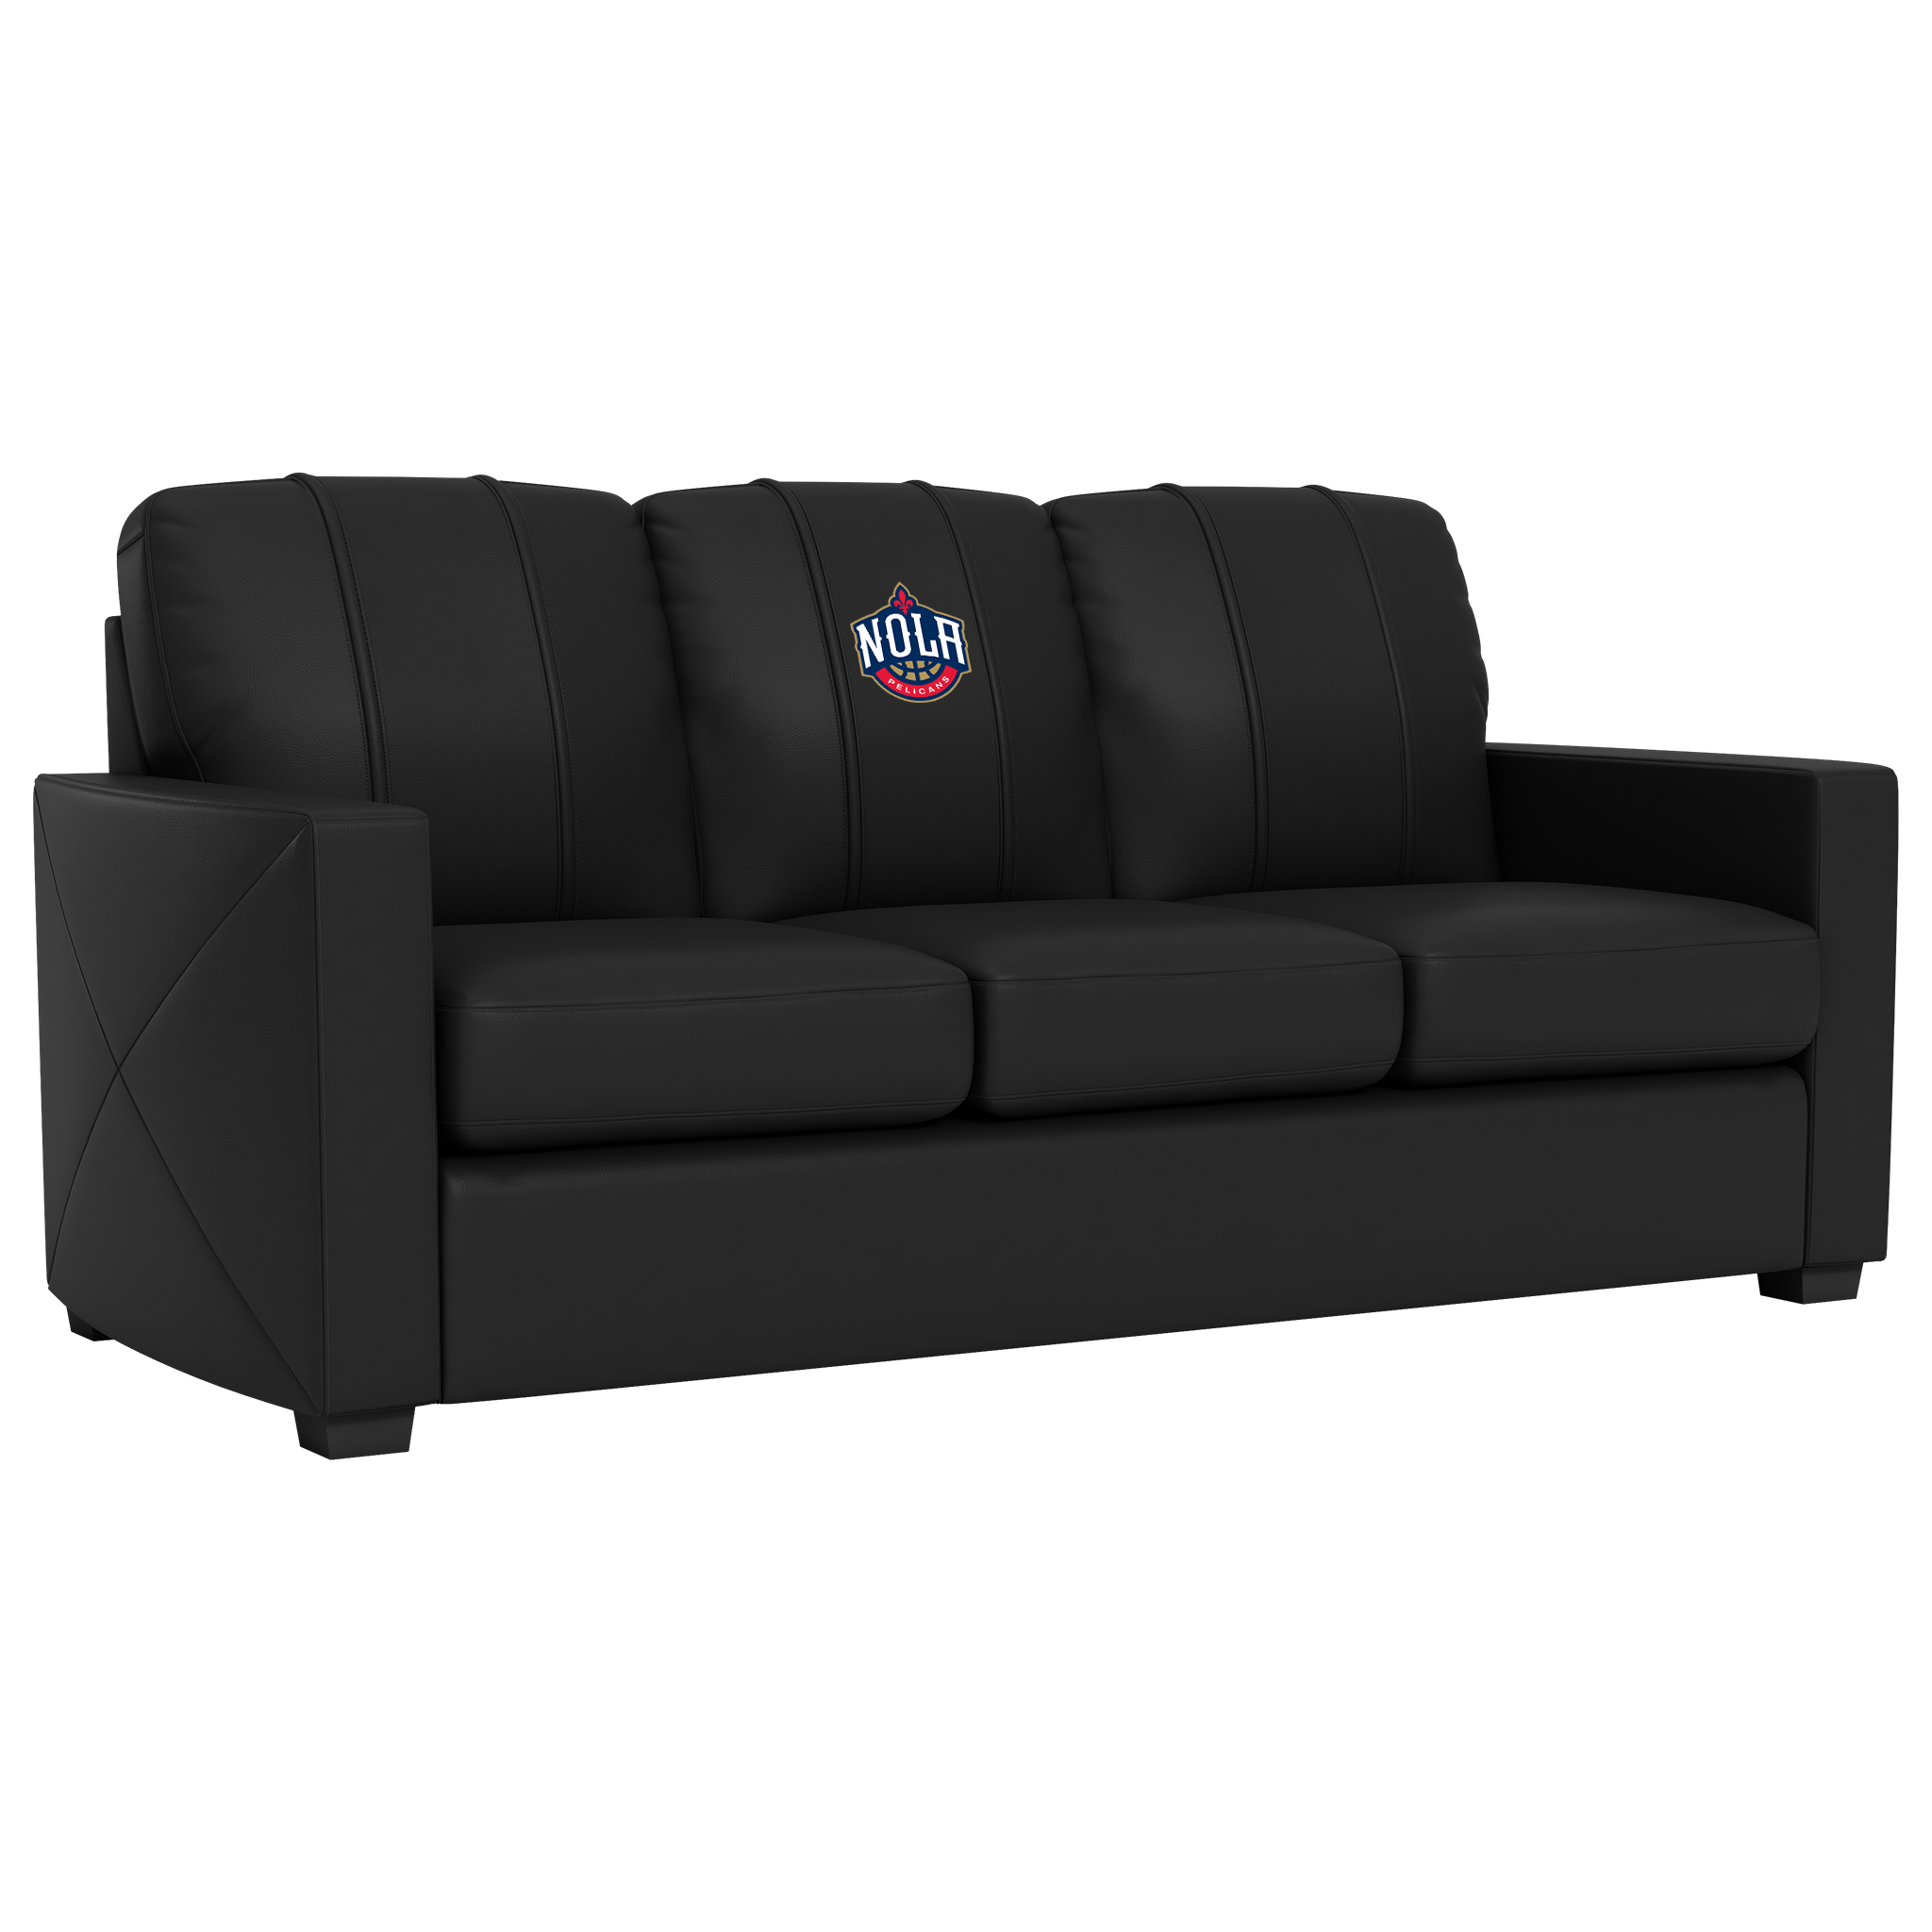 New Orleans Pelicans Silver Sofa with New Orleans Pelicans NOLA